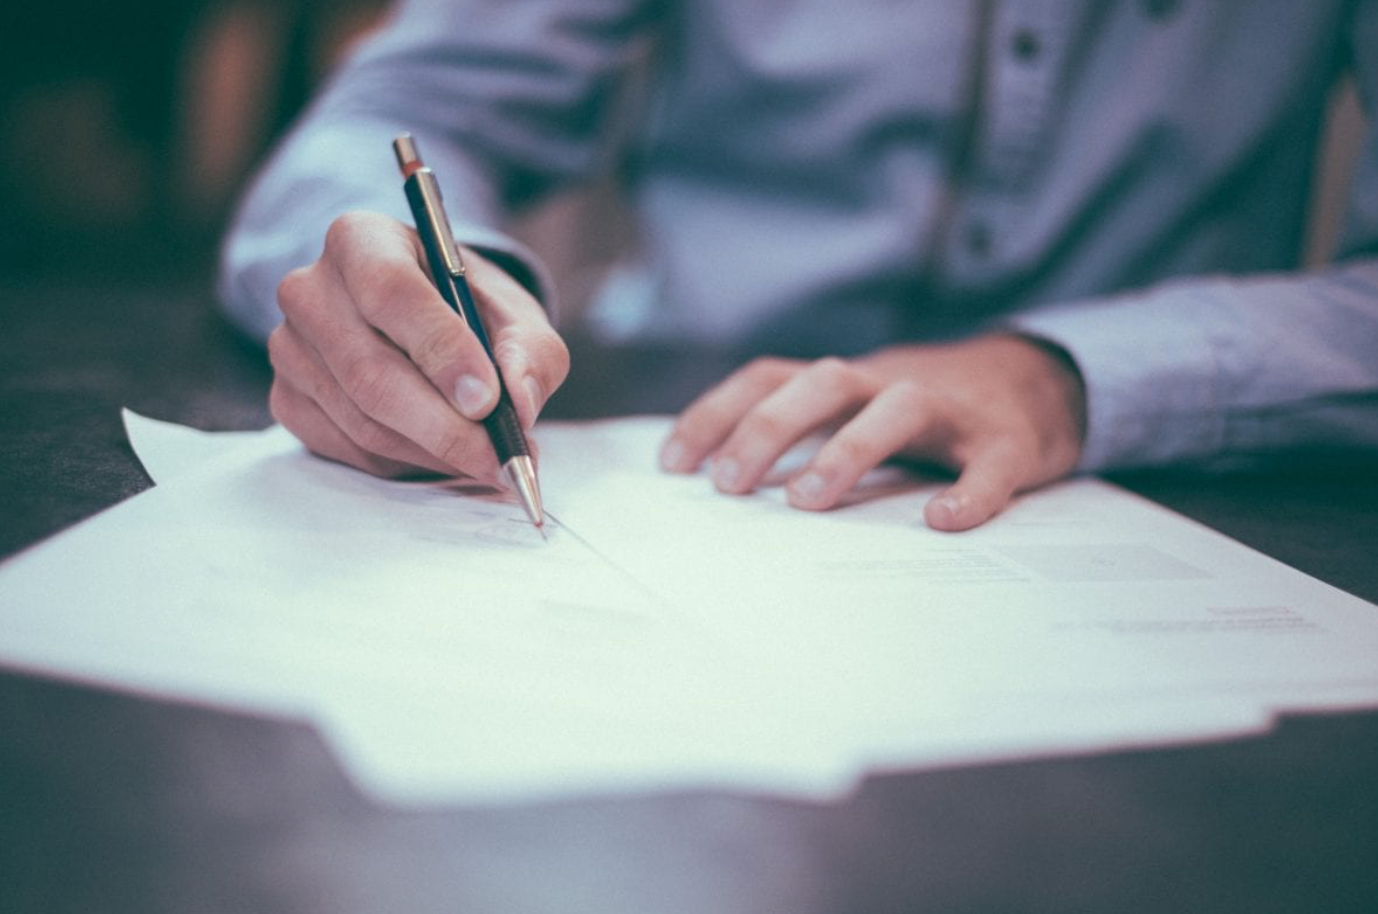 Man in blue dress shirt writing on paperwork; image by Helloquence, via Unsplash.com.